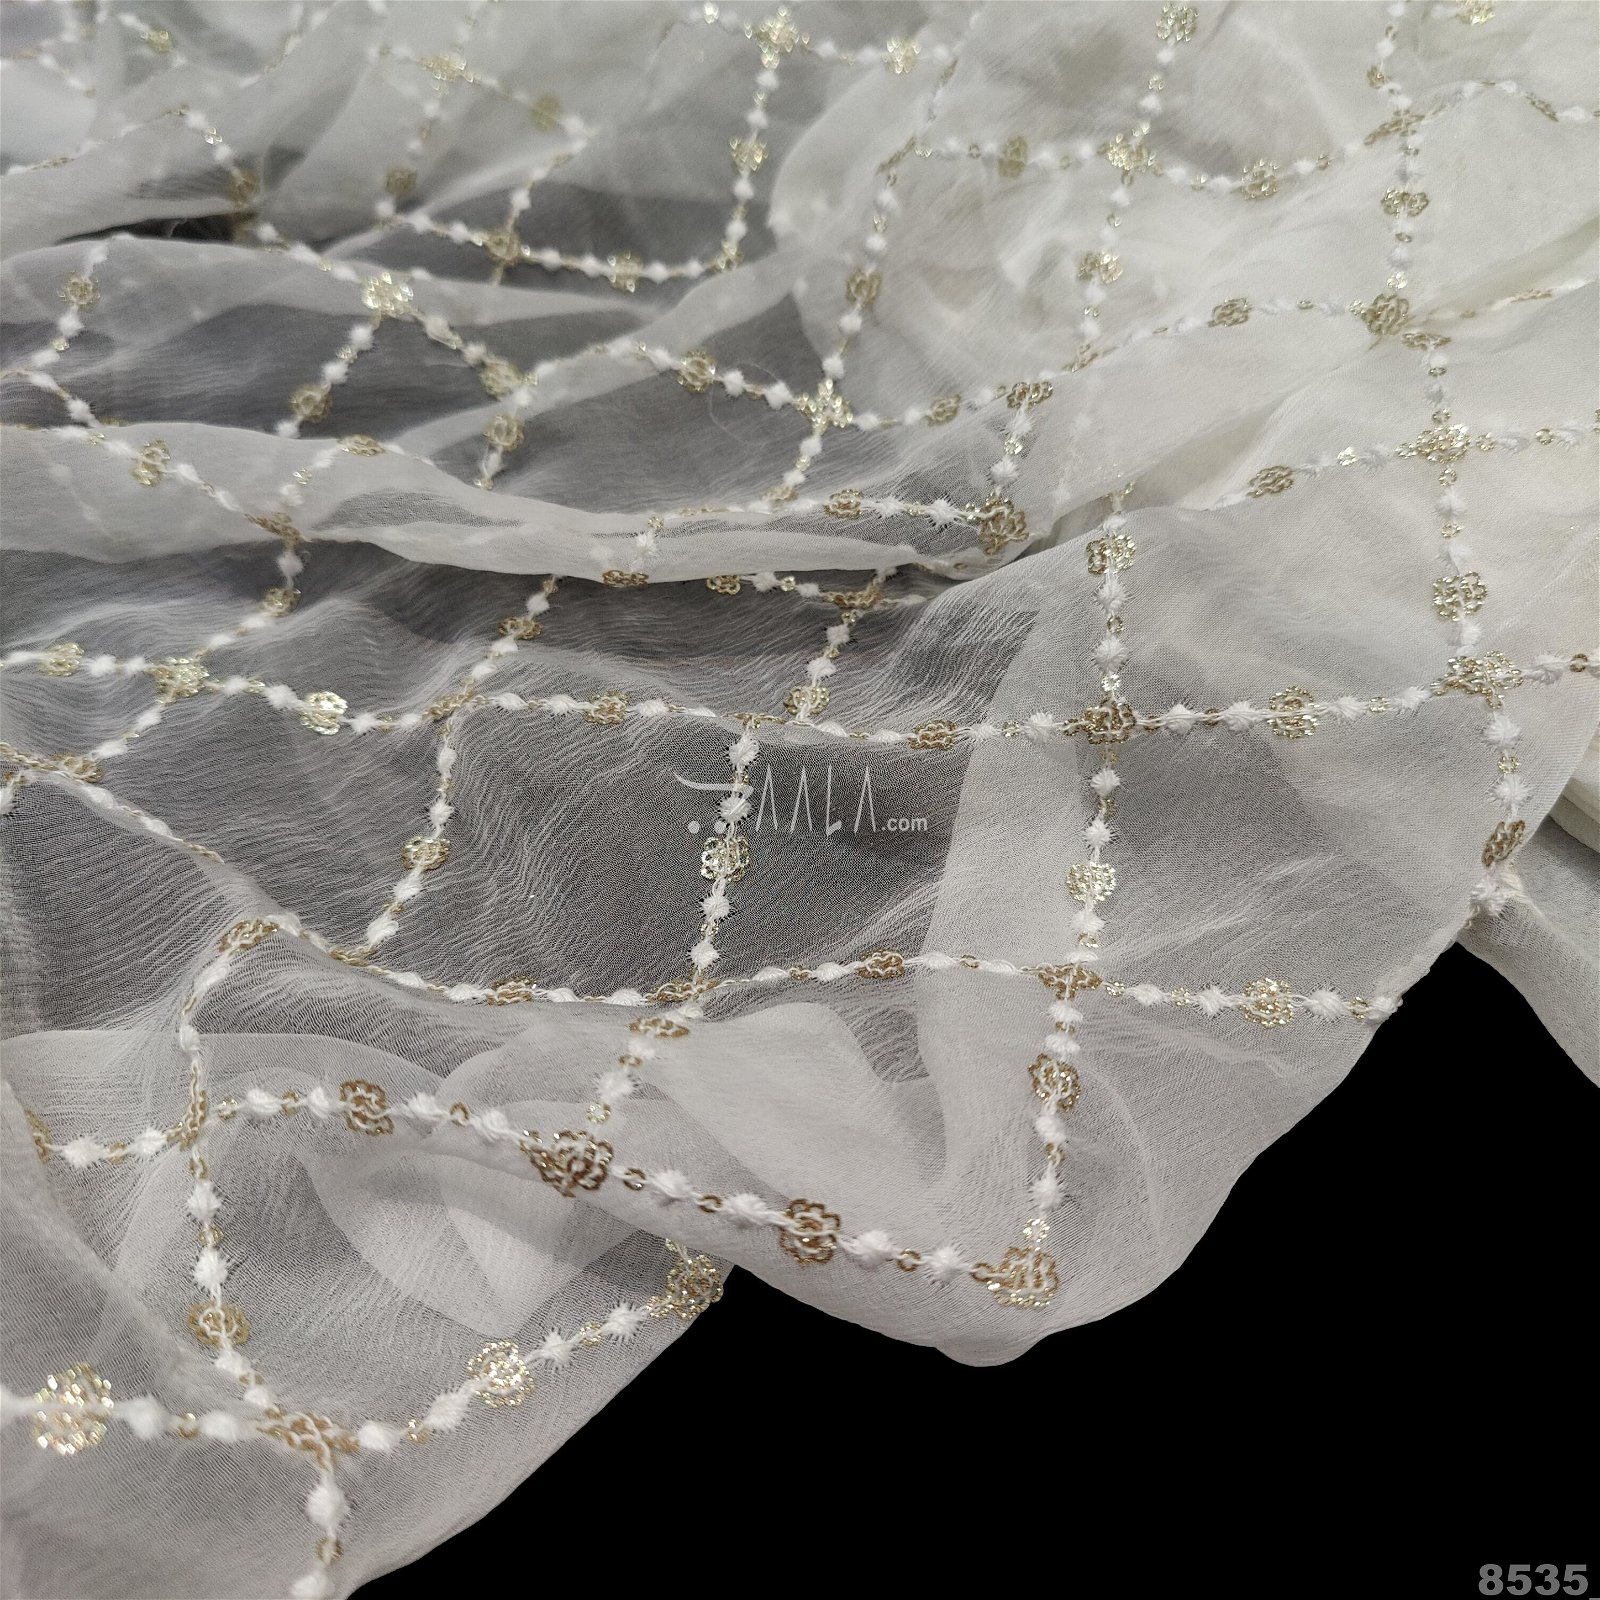 Embroidered Chiffon Viscose 44-Inches DYEABLE Per-Metre #8535